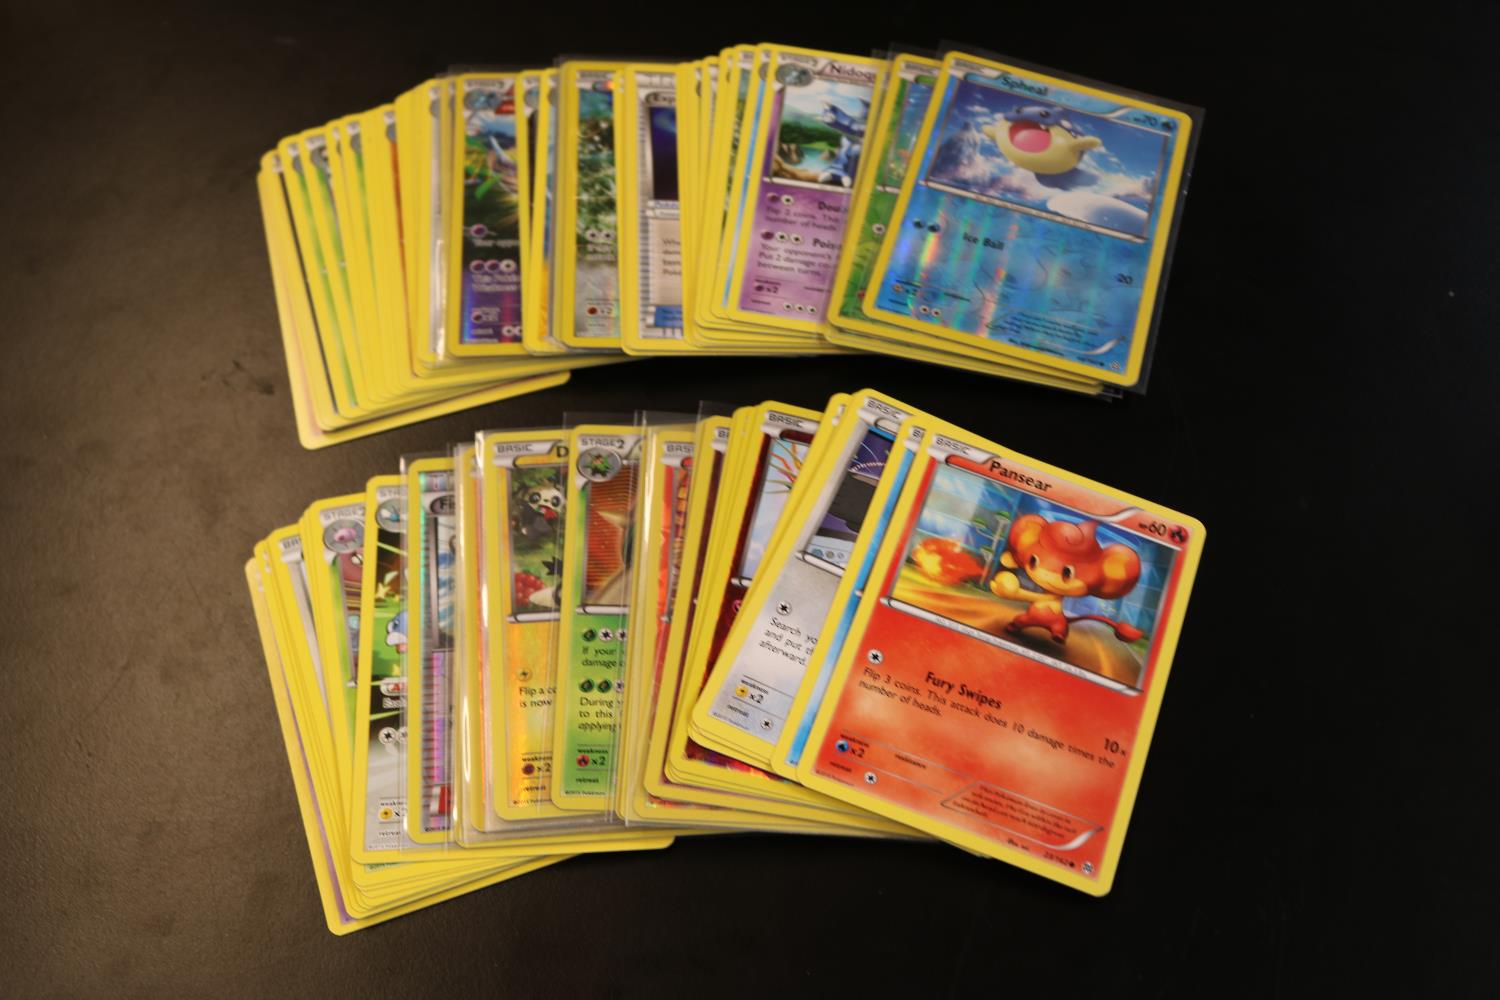 Quantity of Pokémon playing cards to include Dedenne, Floette, Drilbur, Nidoqueen etc